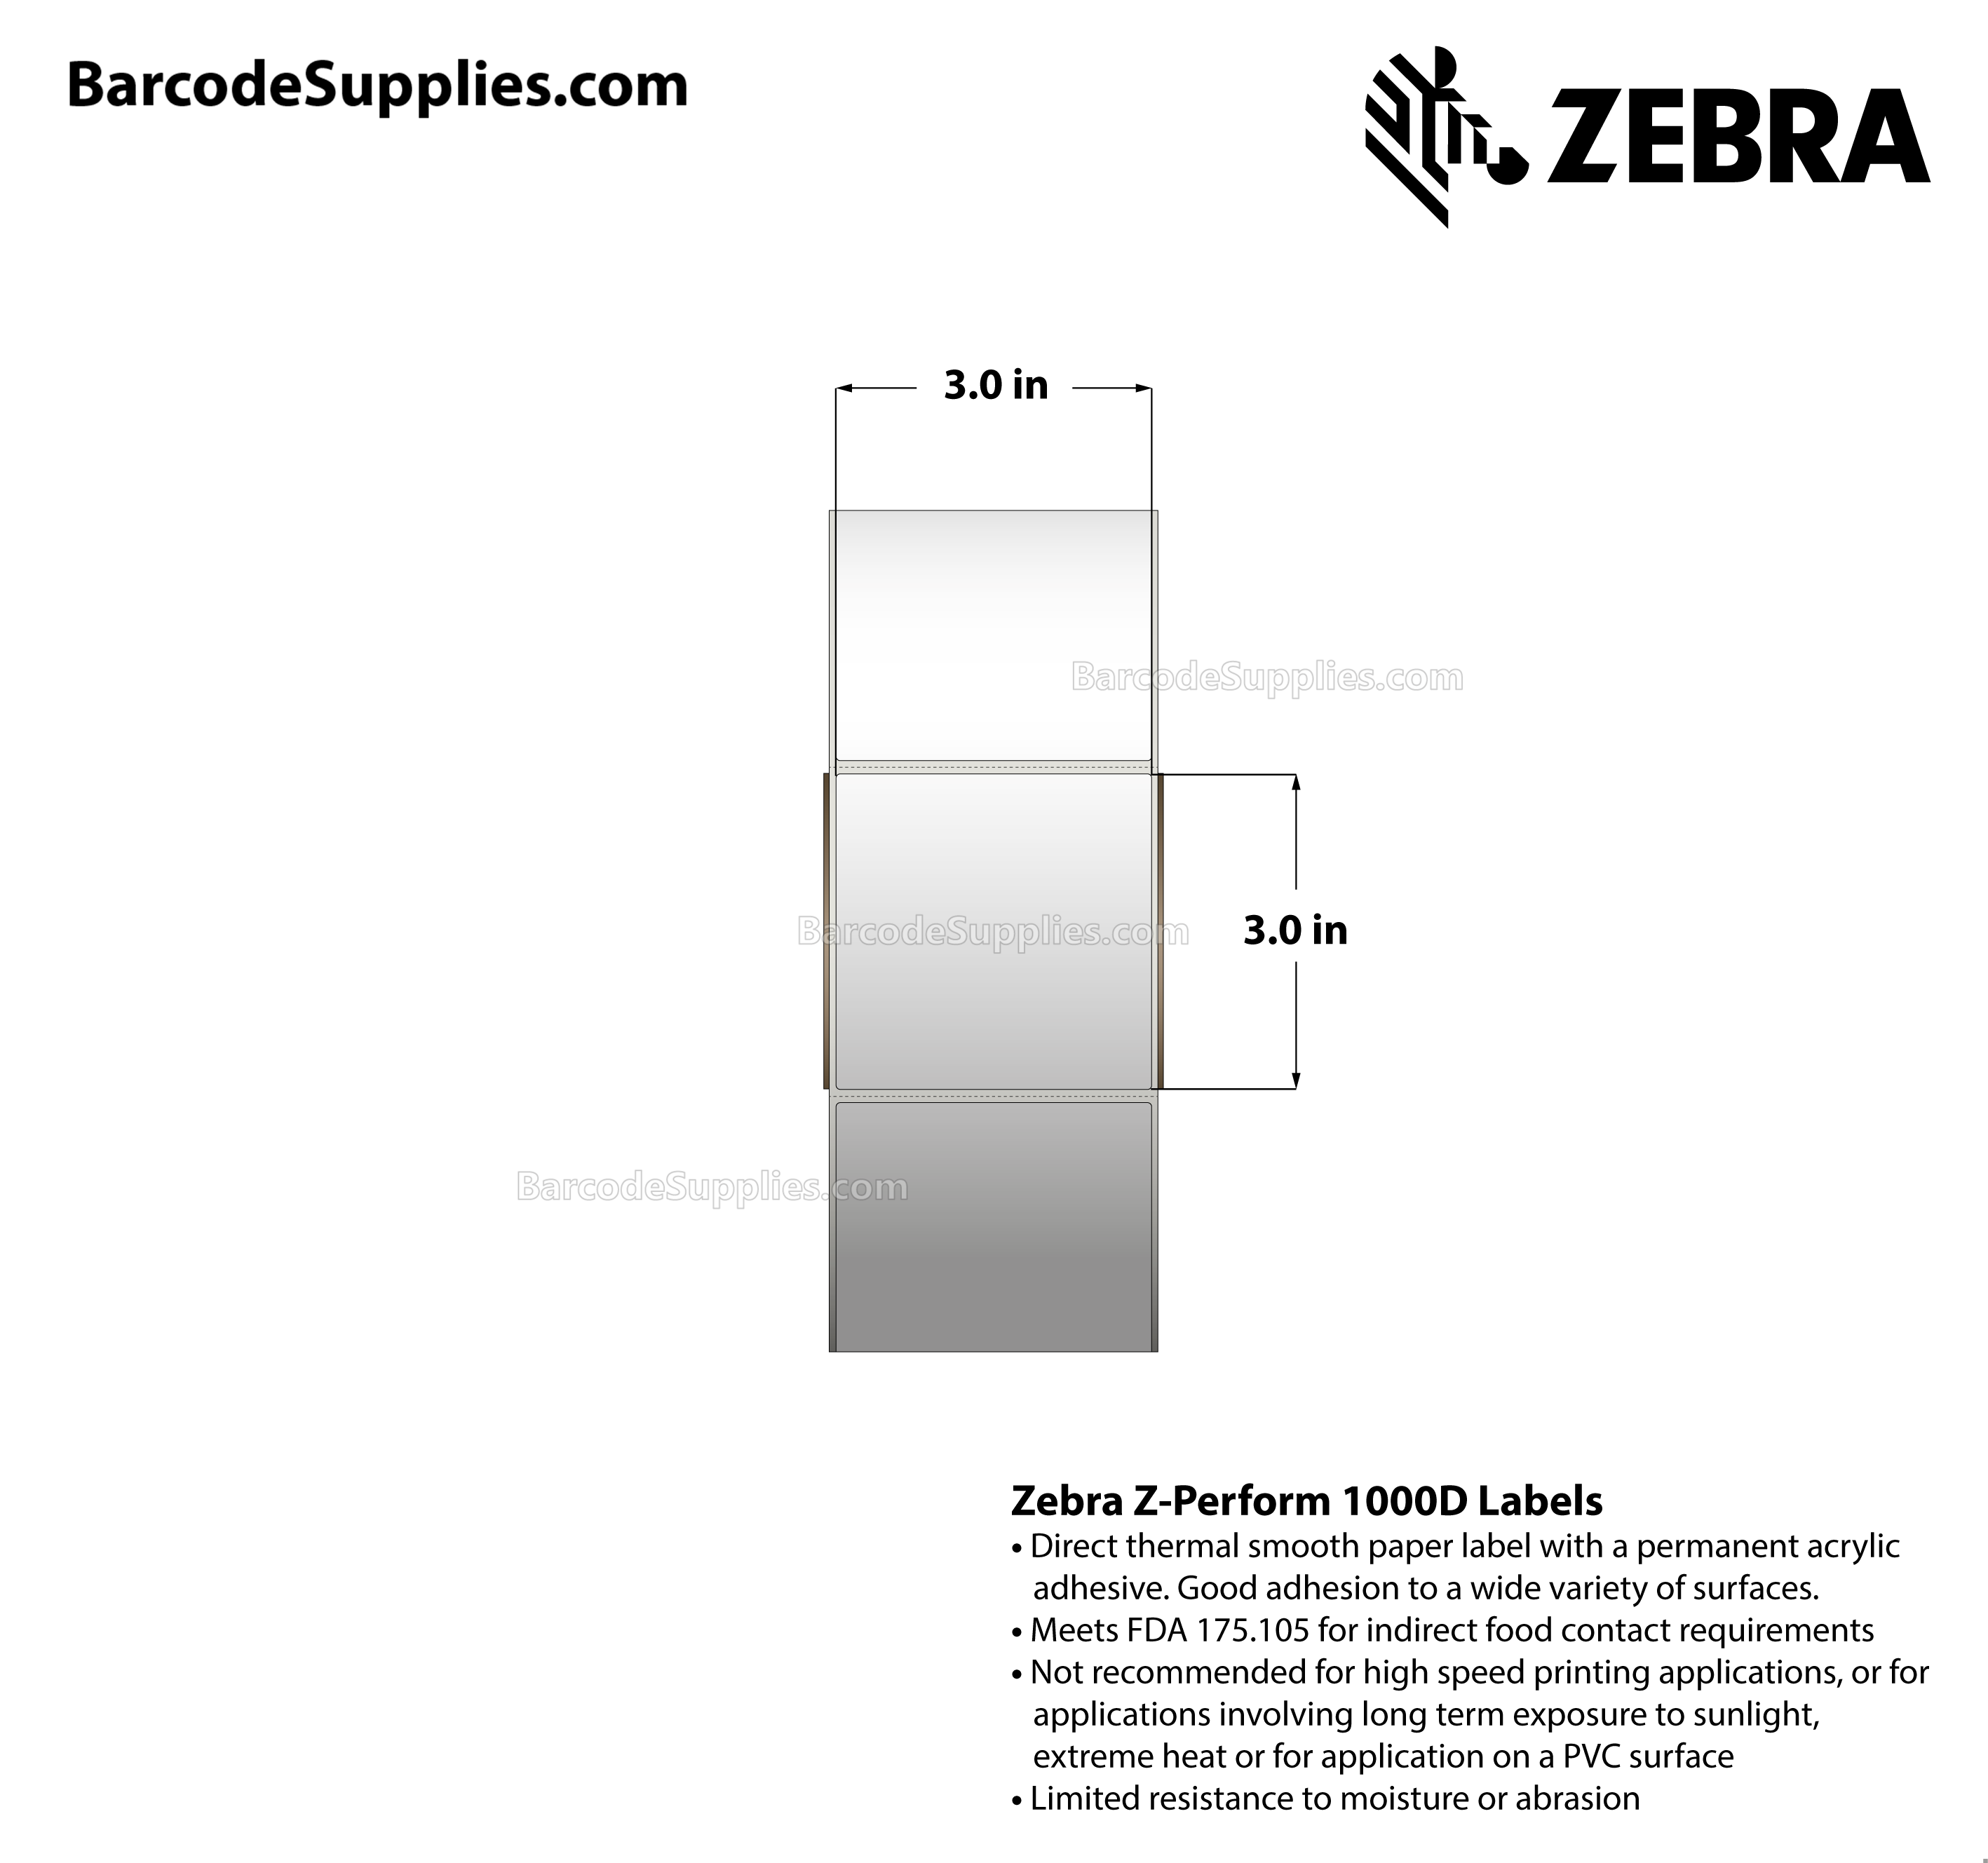 3 x 3 Direct Thermal White Z-Perform 1000D Labels With Permanent Adhesive - Perforated - 1880 Labels Per Roll - Carton Of 4 Rolls - 7520 Labels Total - MPN: 10028312